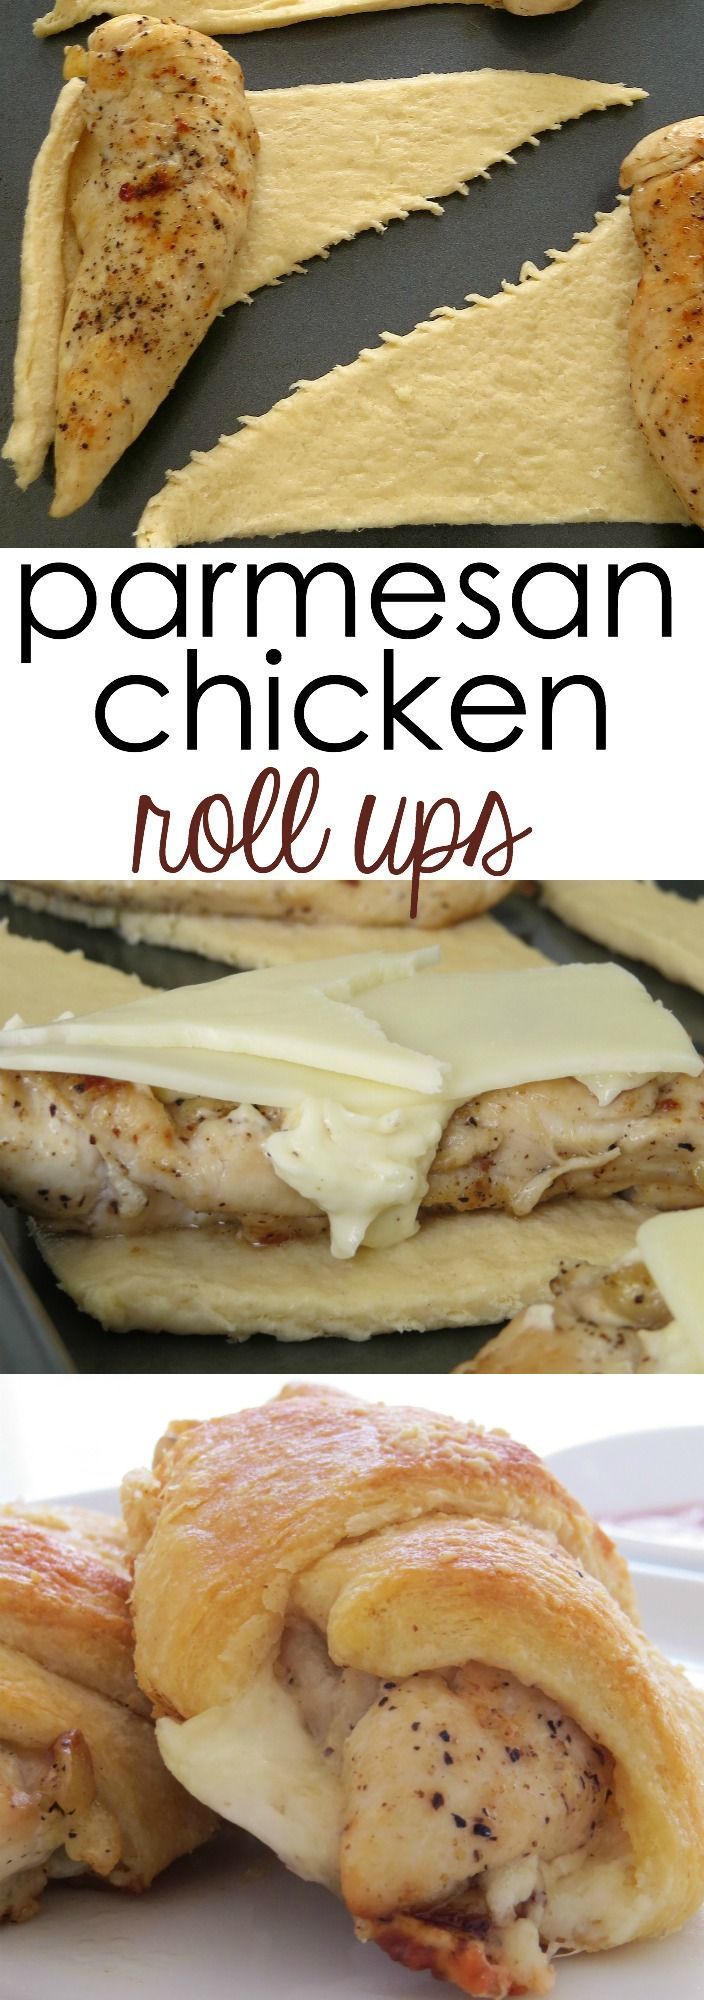 Looking for a quick and easy chicken dinner idea? These Parmesan Chicken Roll Ups will be one of your